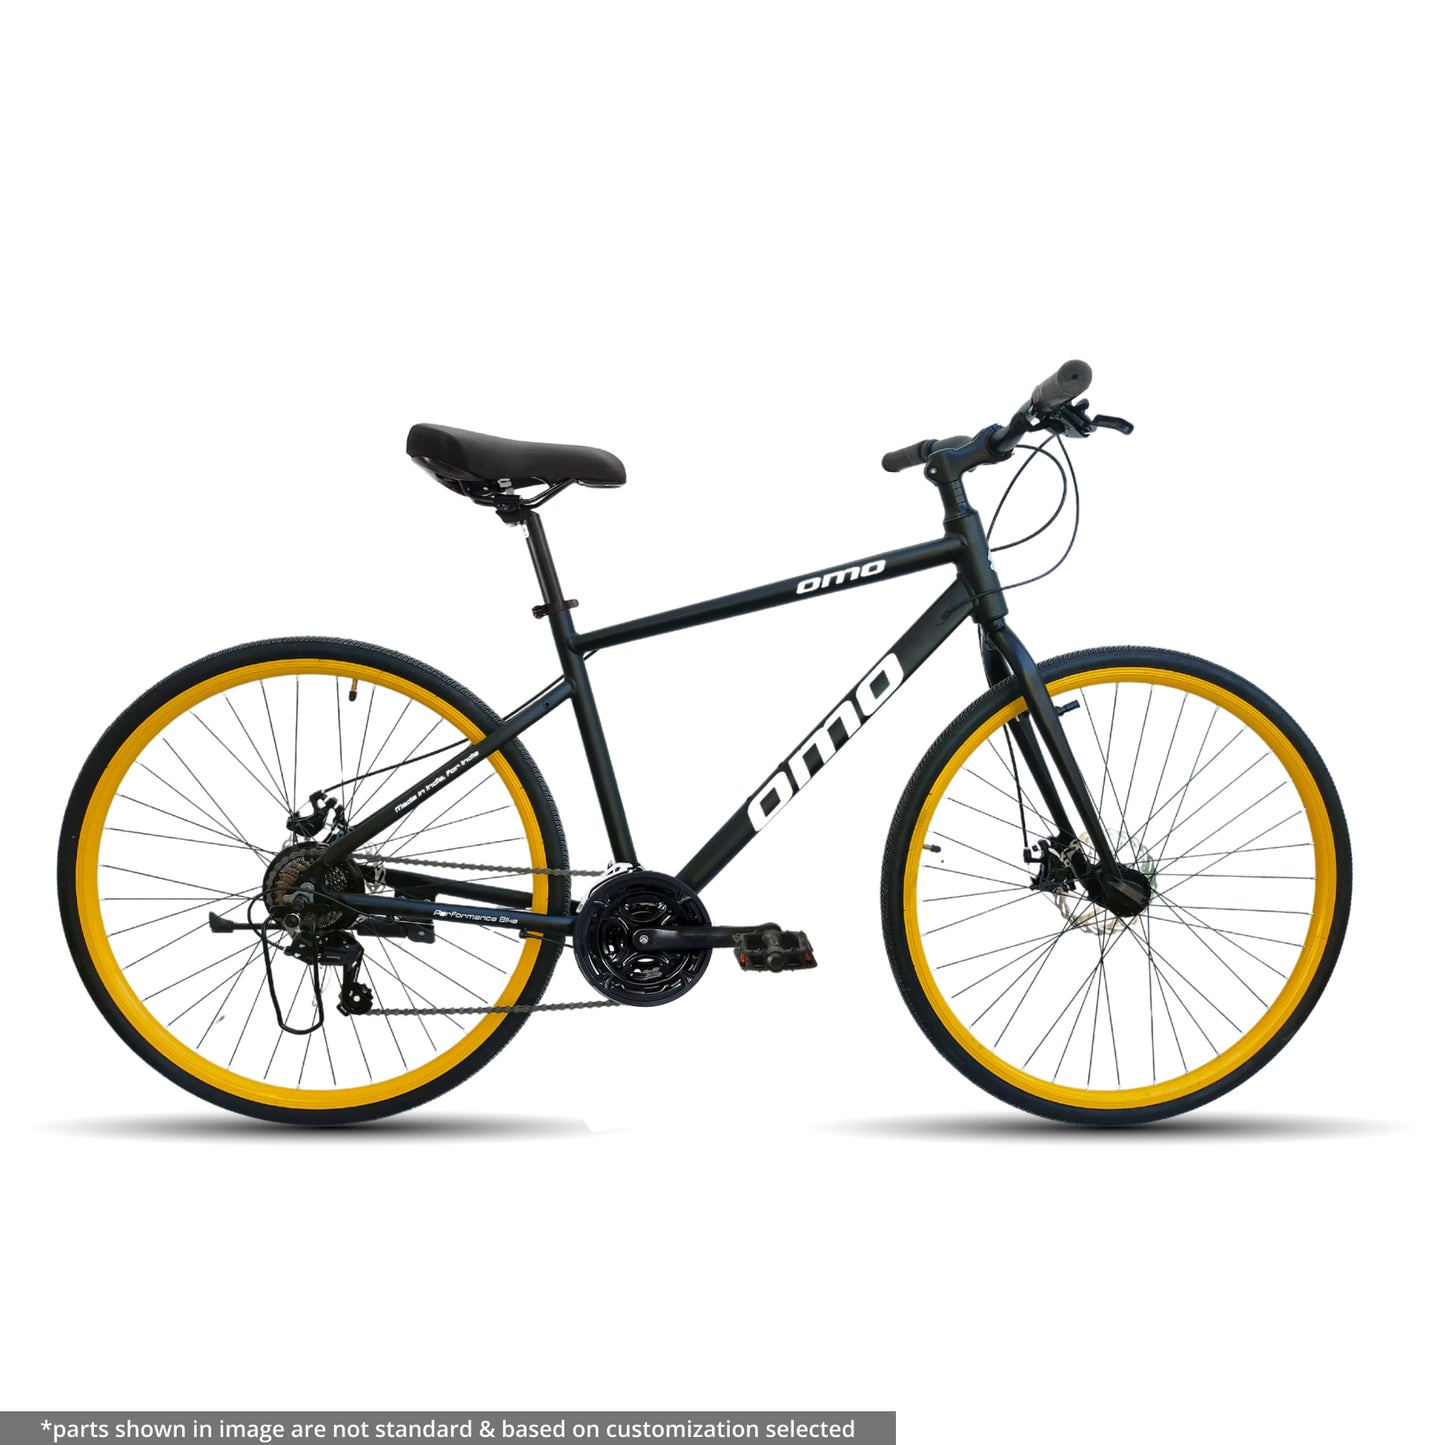 Hampi ACE 24S alloy frame hybrid bike under 15000 in india online by omobikes yellow color